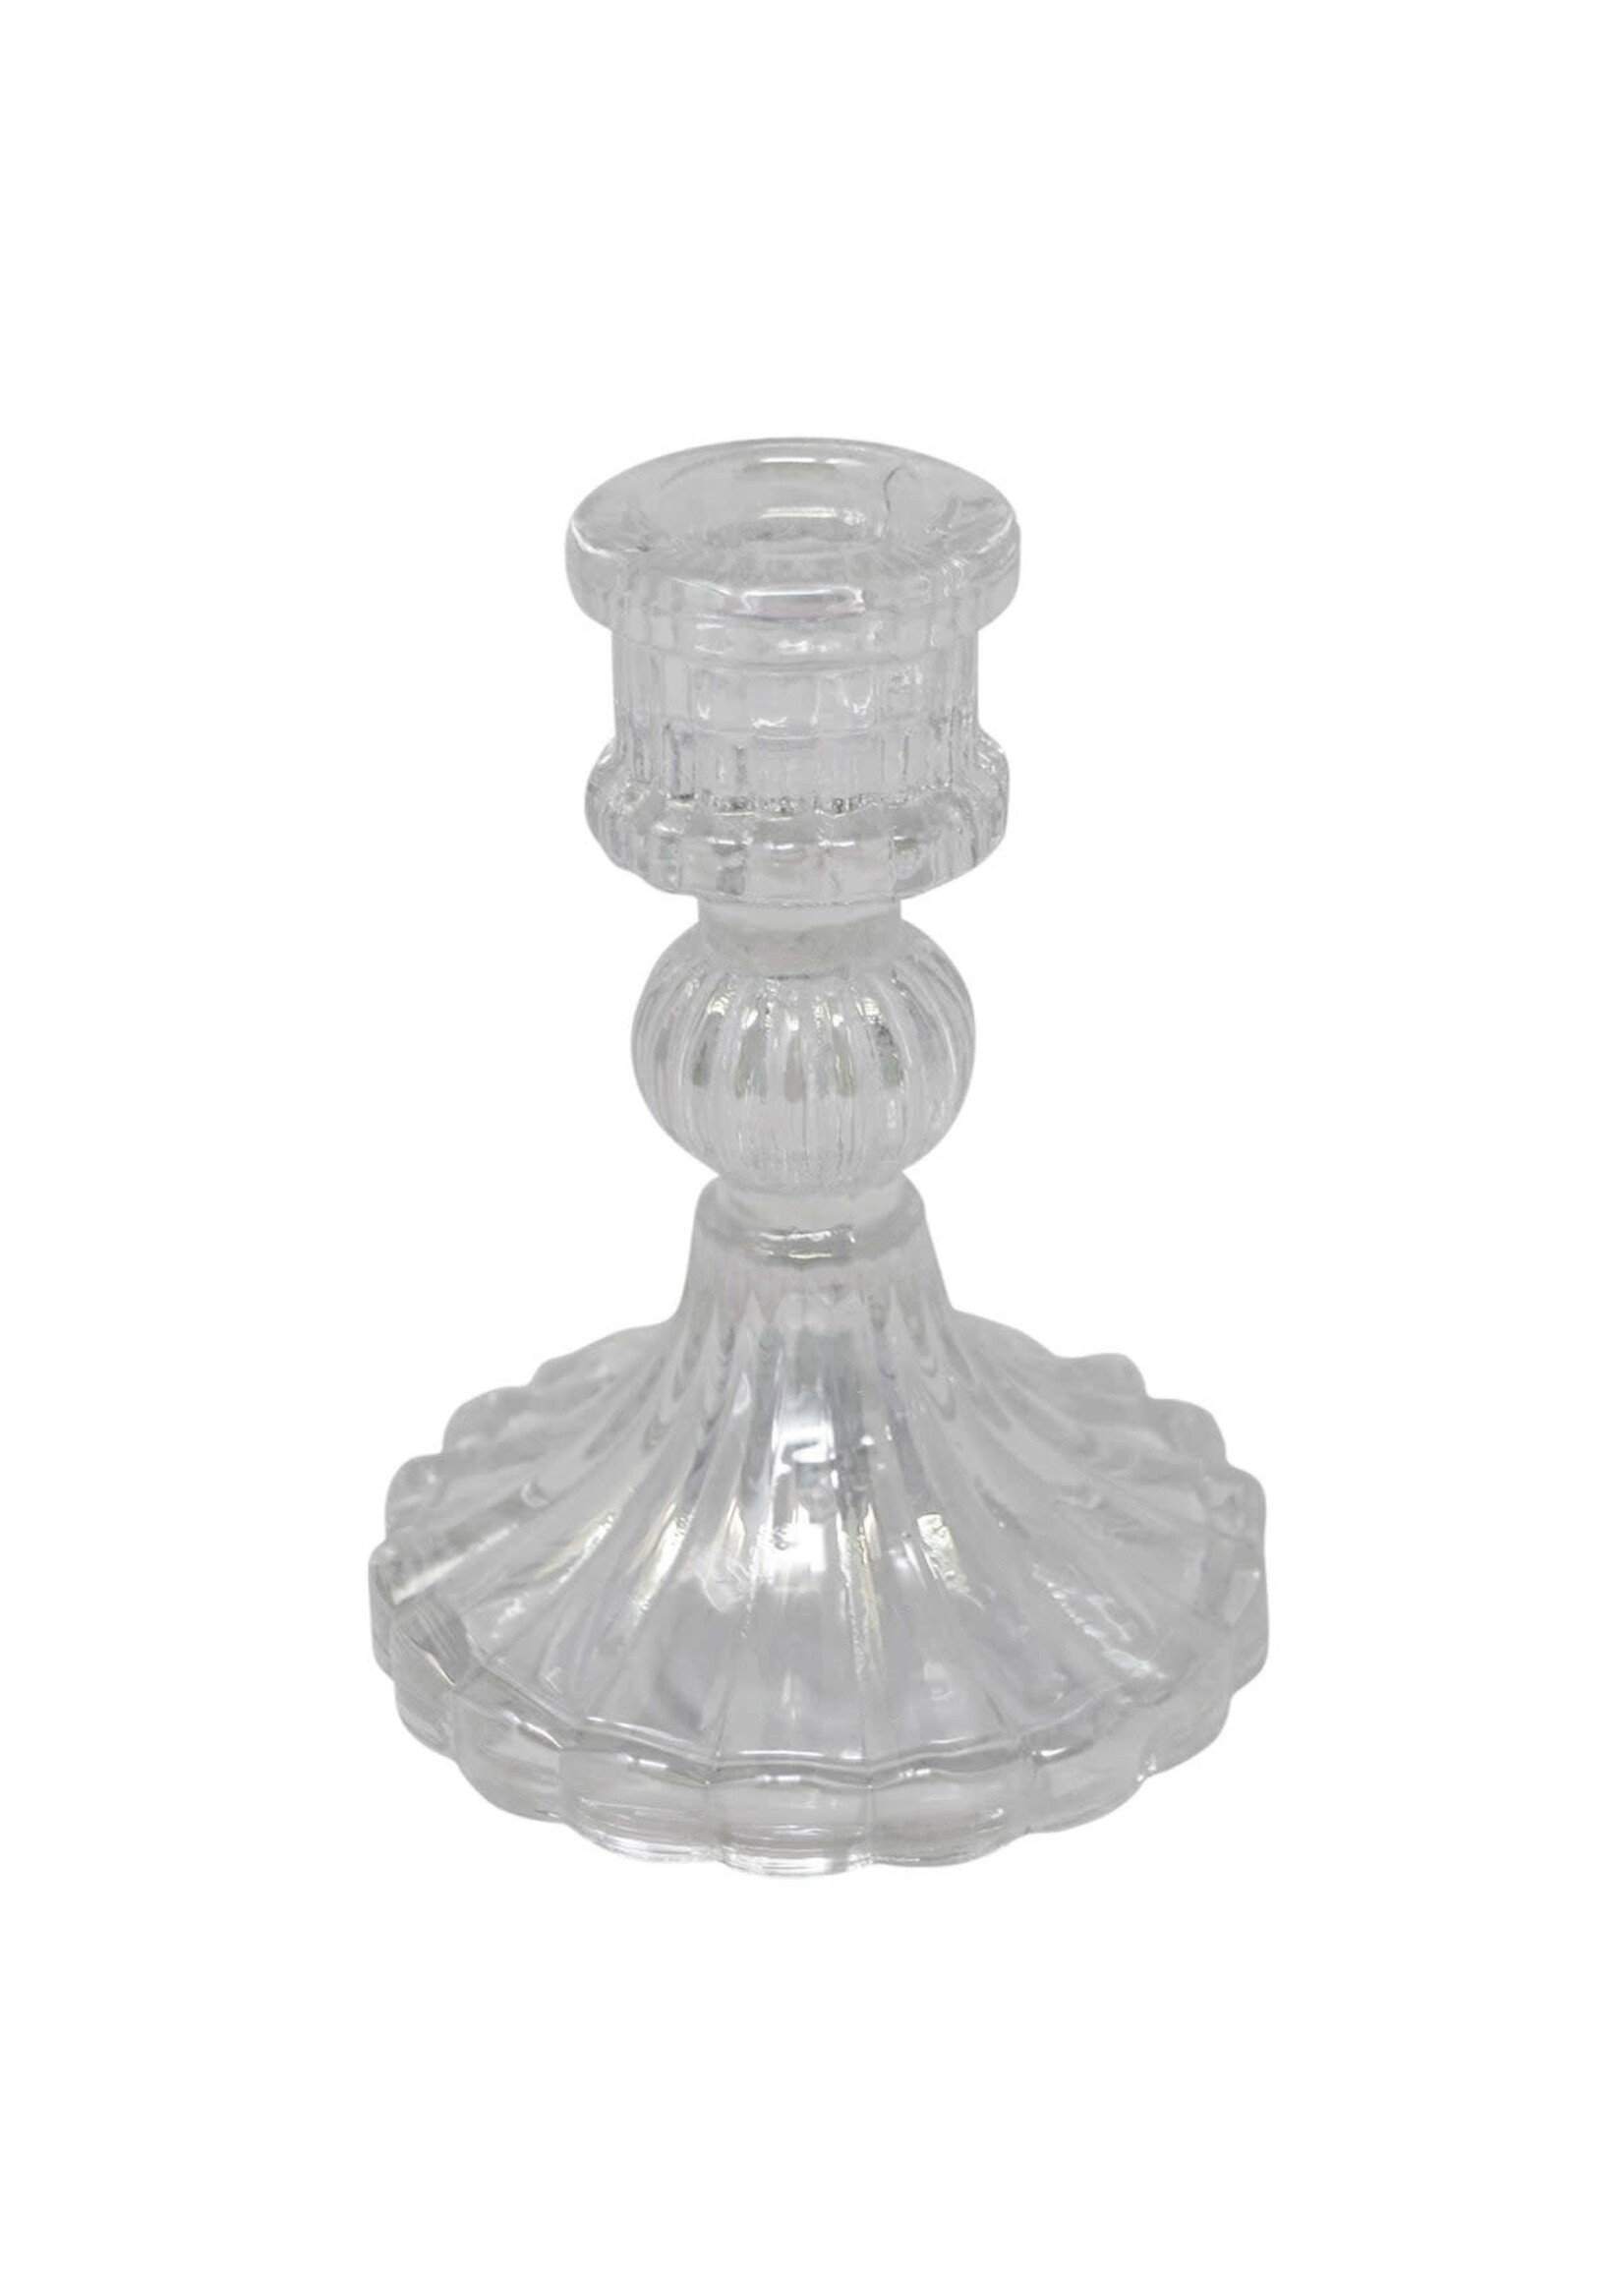 NOS CANDLE HOLDER GLASS